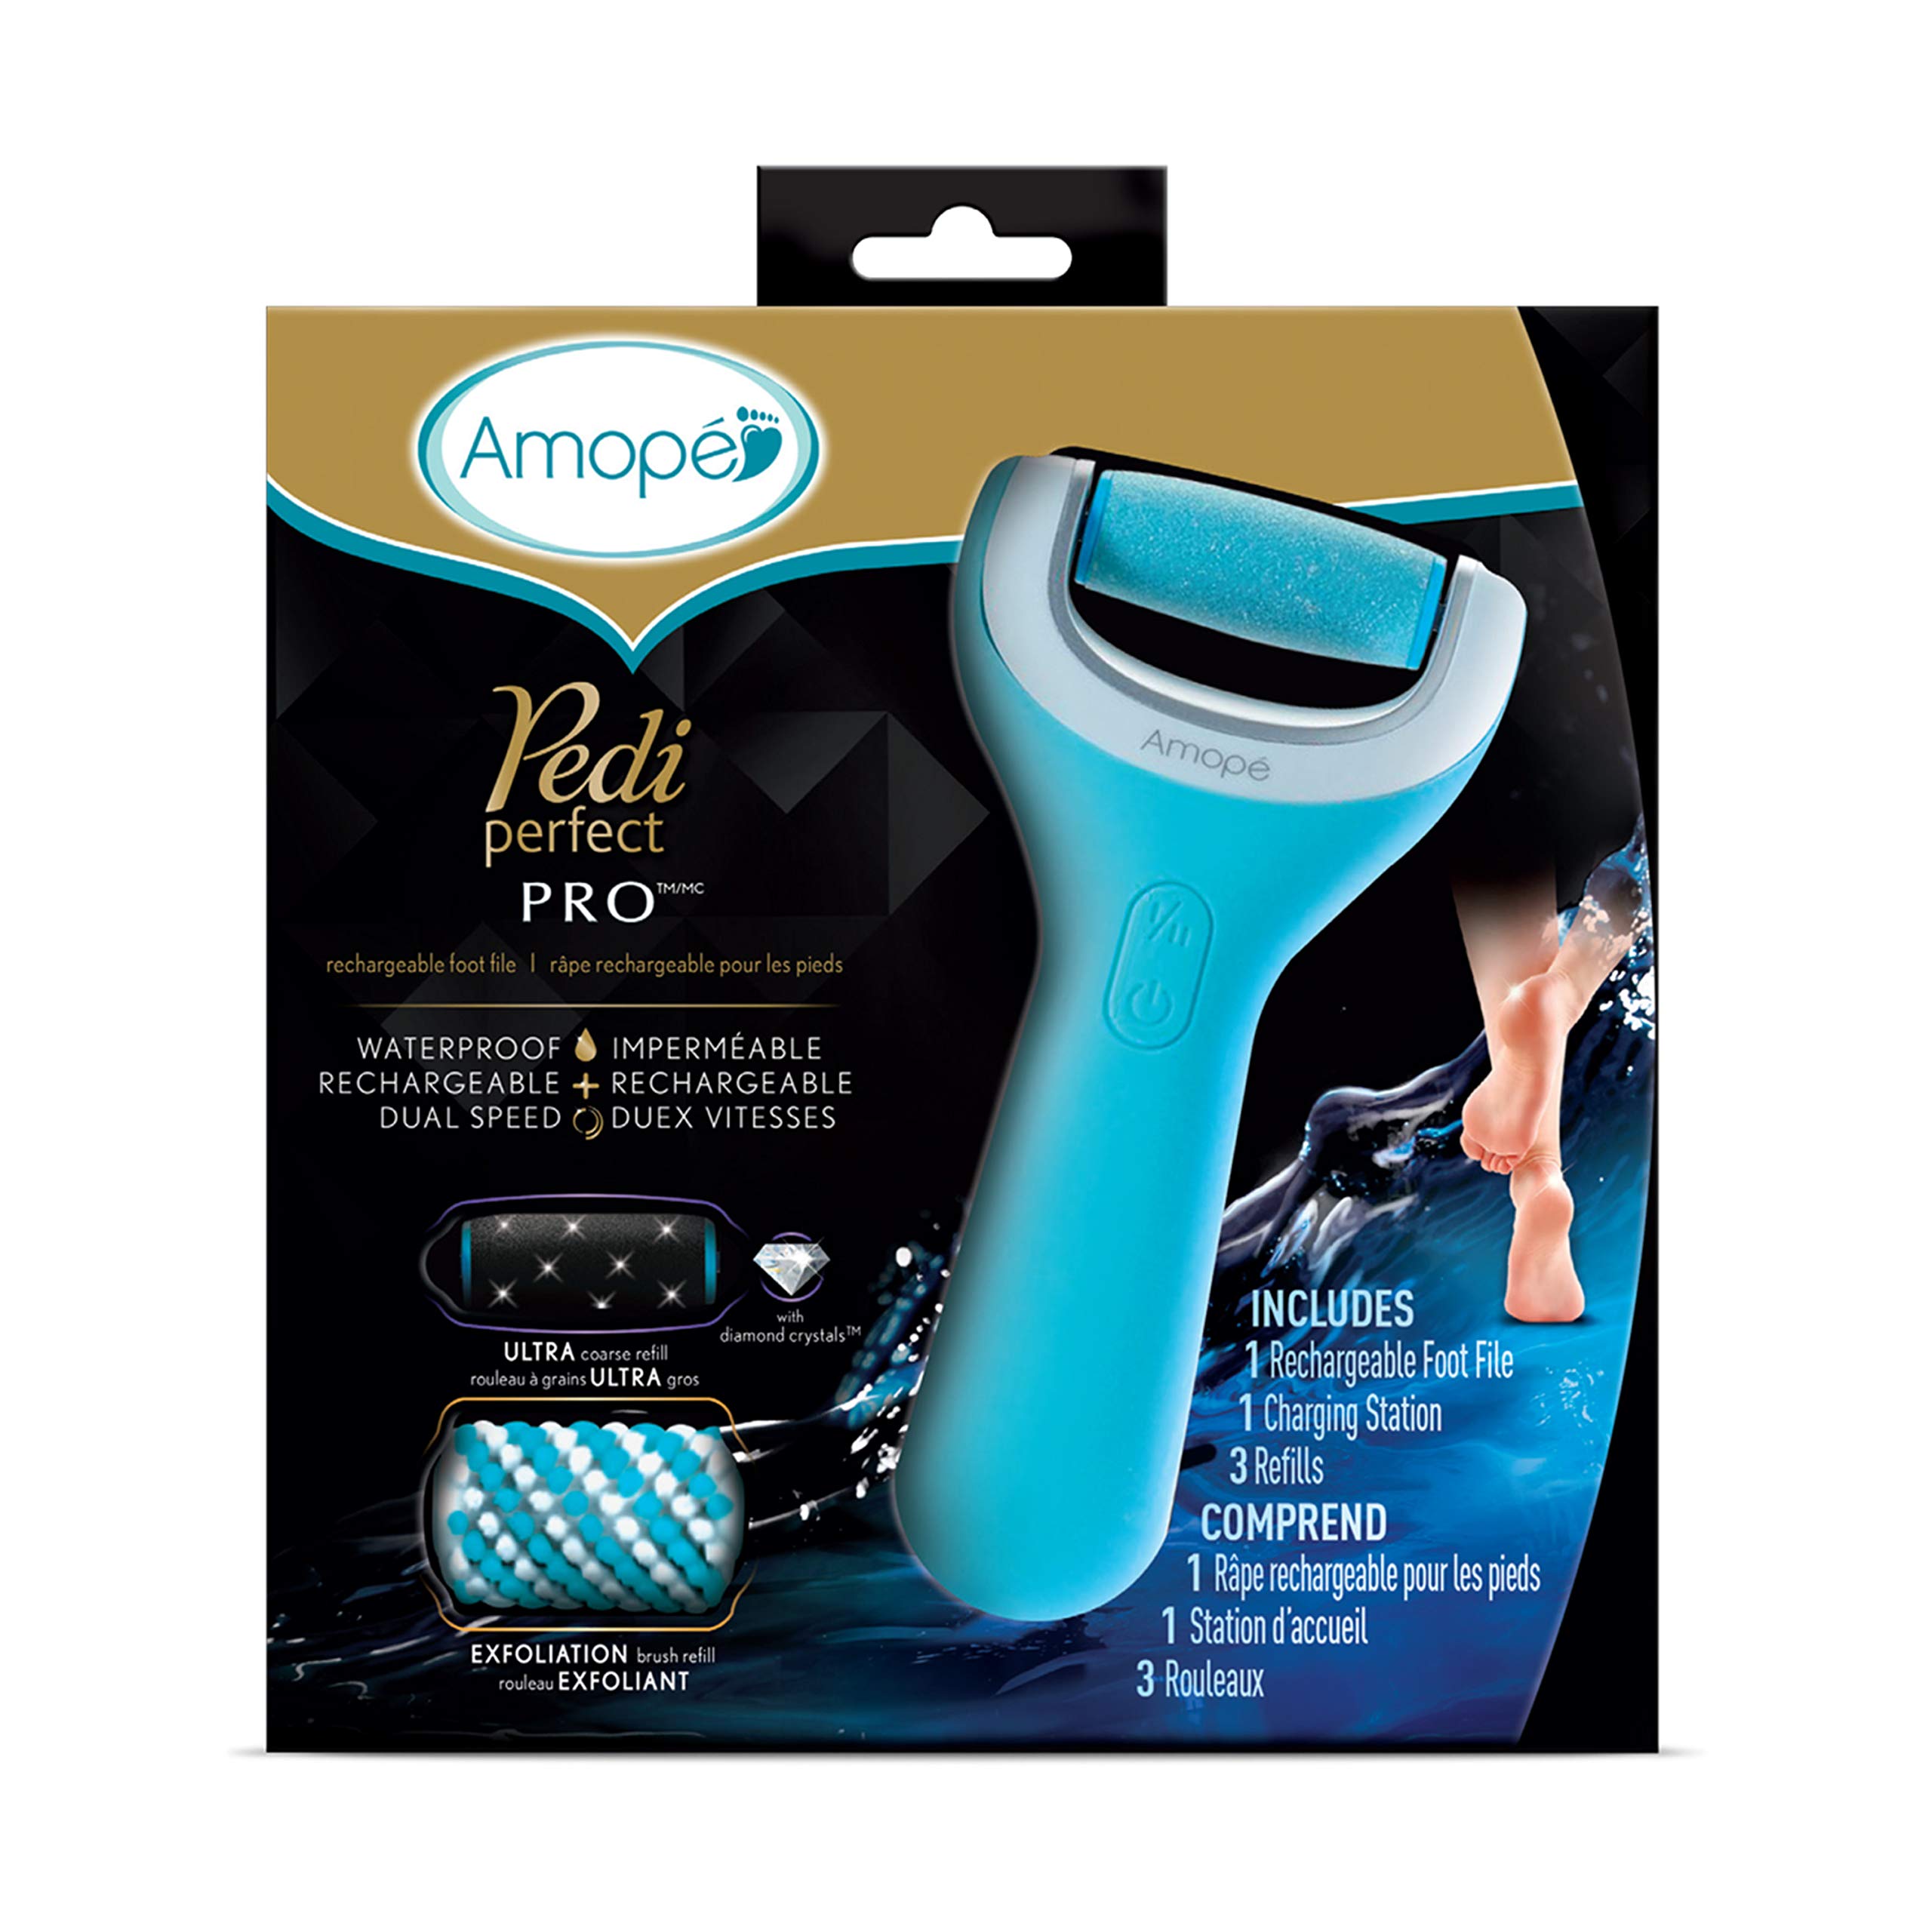 Amope Pedi Perfect Wet & Dry Foot File, Callous Remover for Feet, Hard and Dead Skin - Rechargeable & Waterproof (Packaging May Vary)